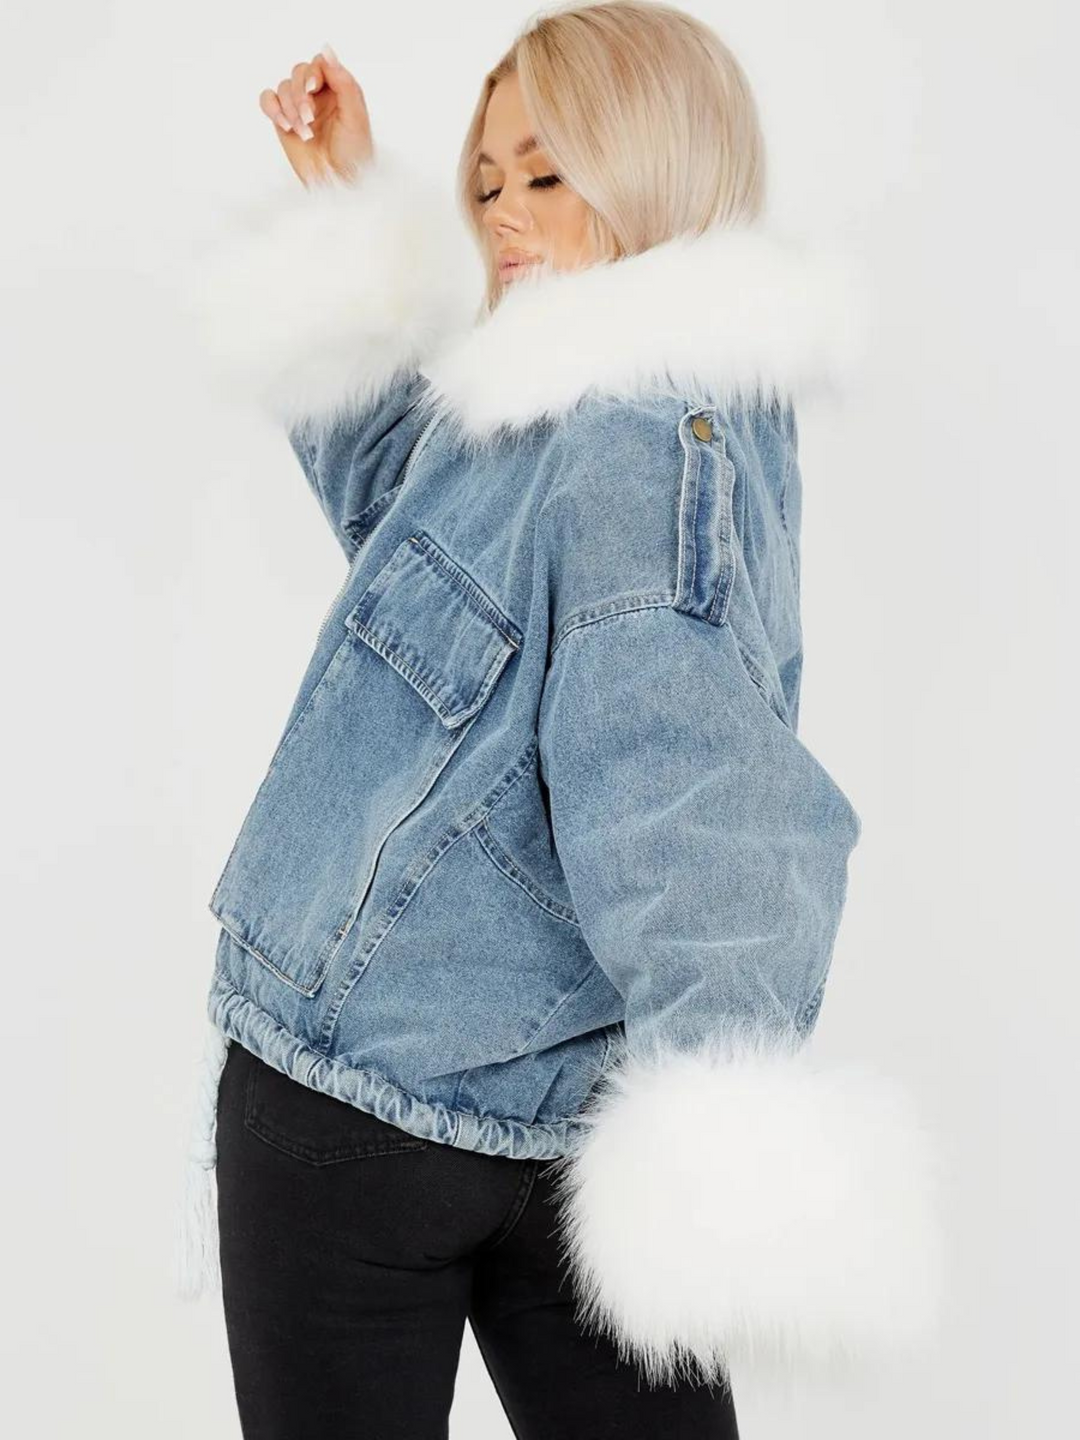 Model wears an oversized denim jacket with a white faux fur collar and white faux fur cuffs. Model has one hand in the air and the other by her side. The white cuffed fur is visible.